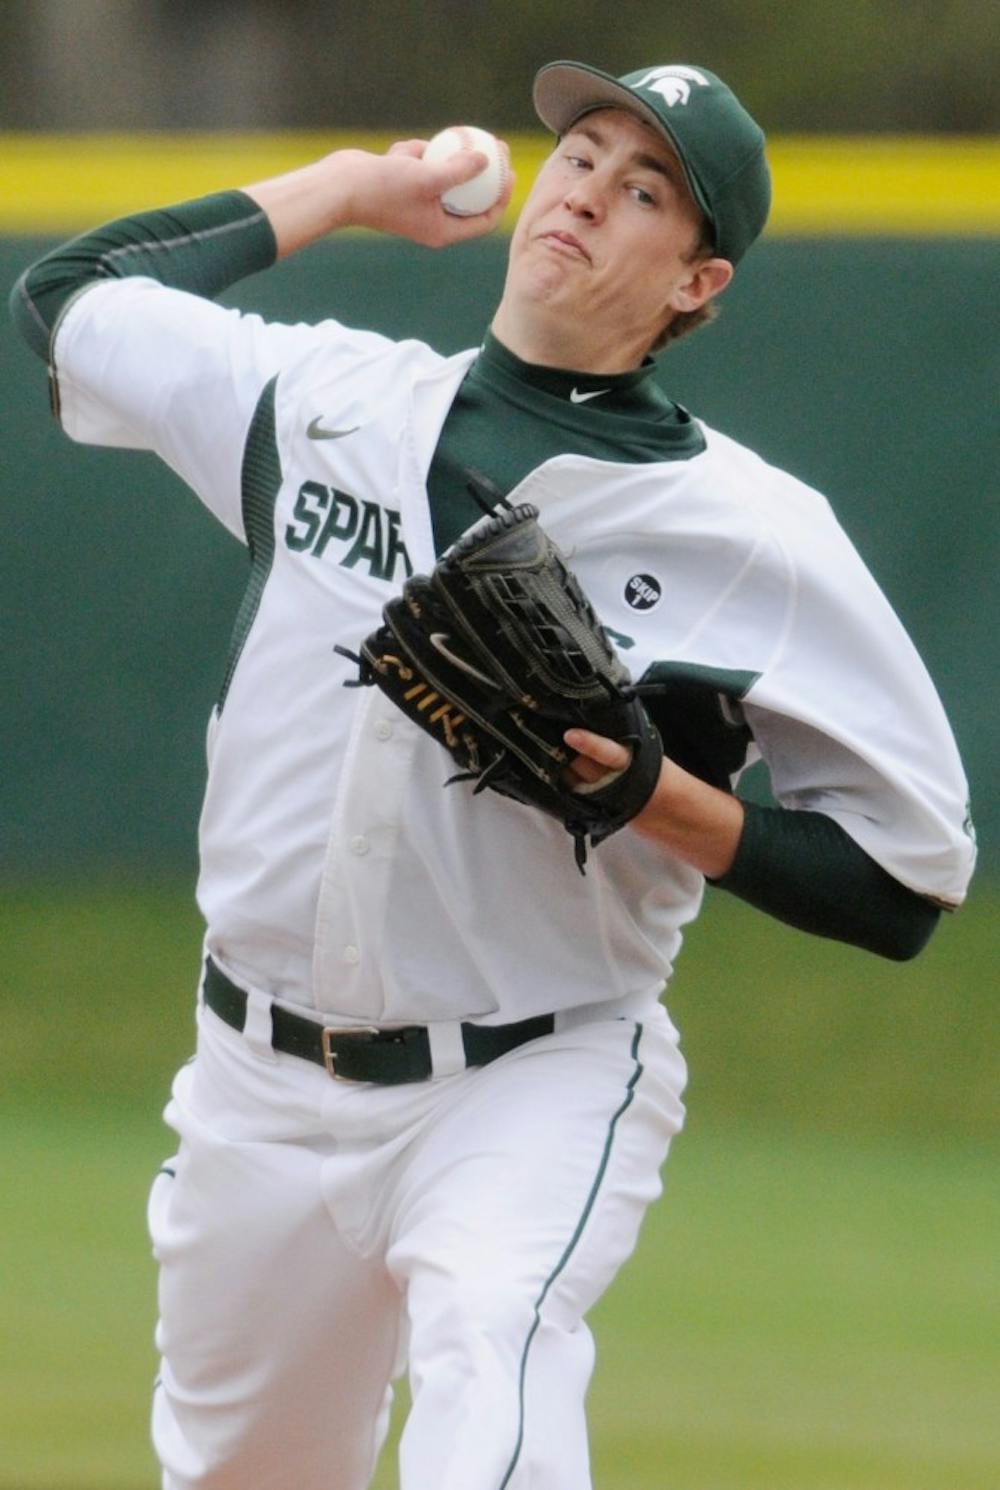 Senior right-handed pitcher Tony Bucciferro throws the ball on Saturday afternoon at McLane Baseball Stadium at Old College Field. The Spartans fell to the Buckeyes 1-0 on Saturday afternoon during their first game of the three-game series. Justin Wan/The State News